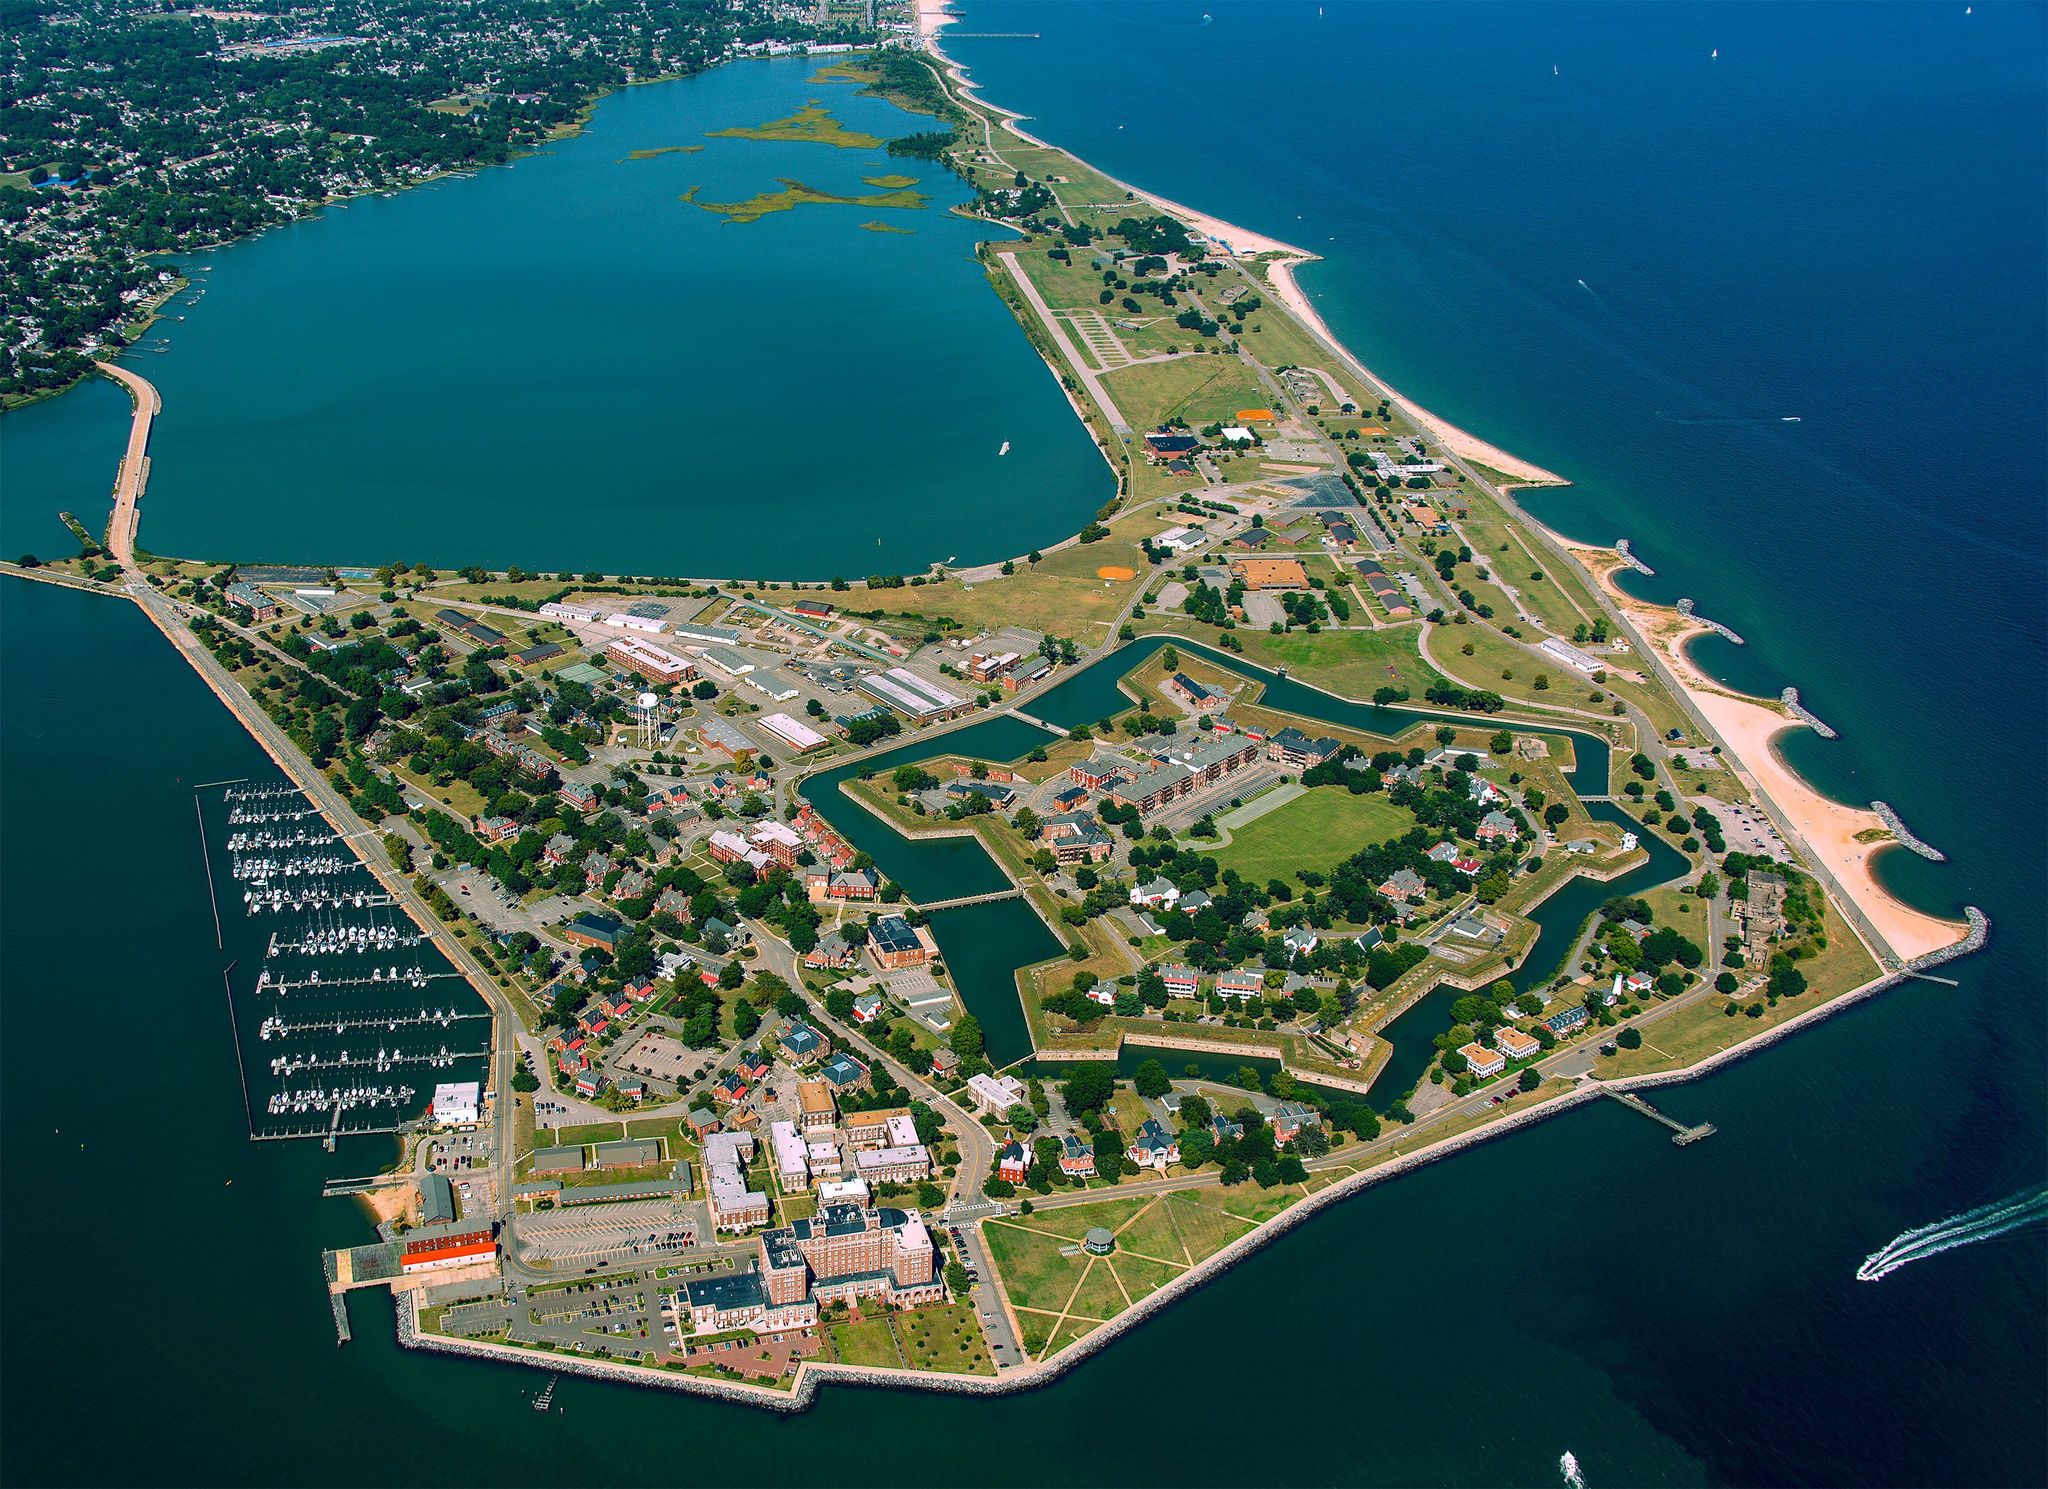 A unique perspective only available from the air brings the entire scope of Fort Monroe into focus in one image.